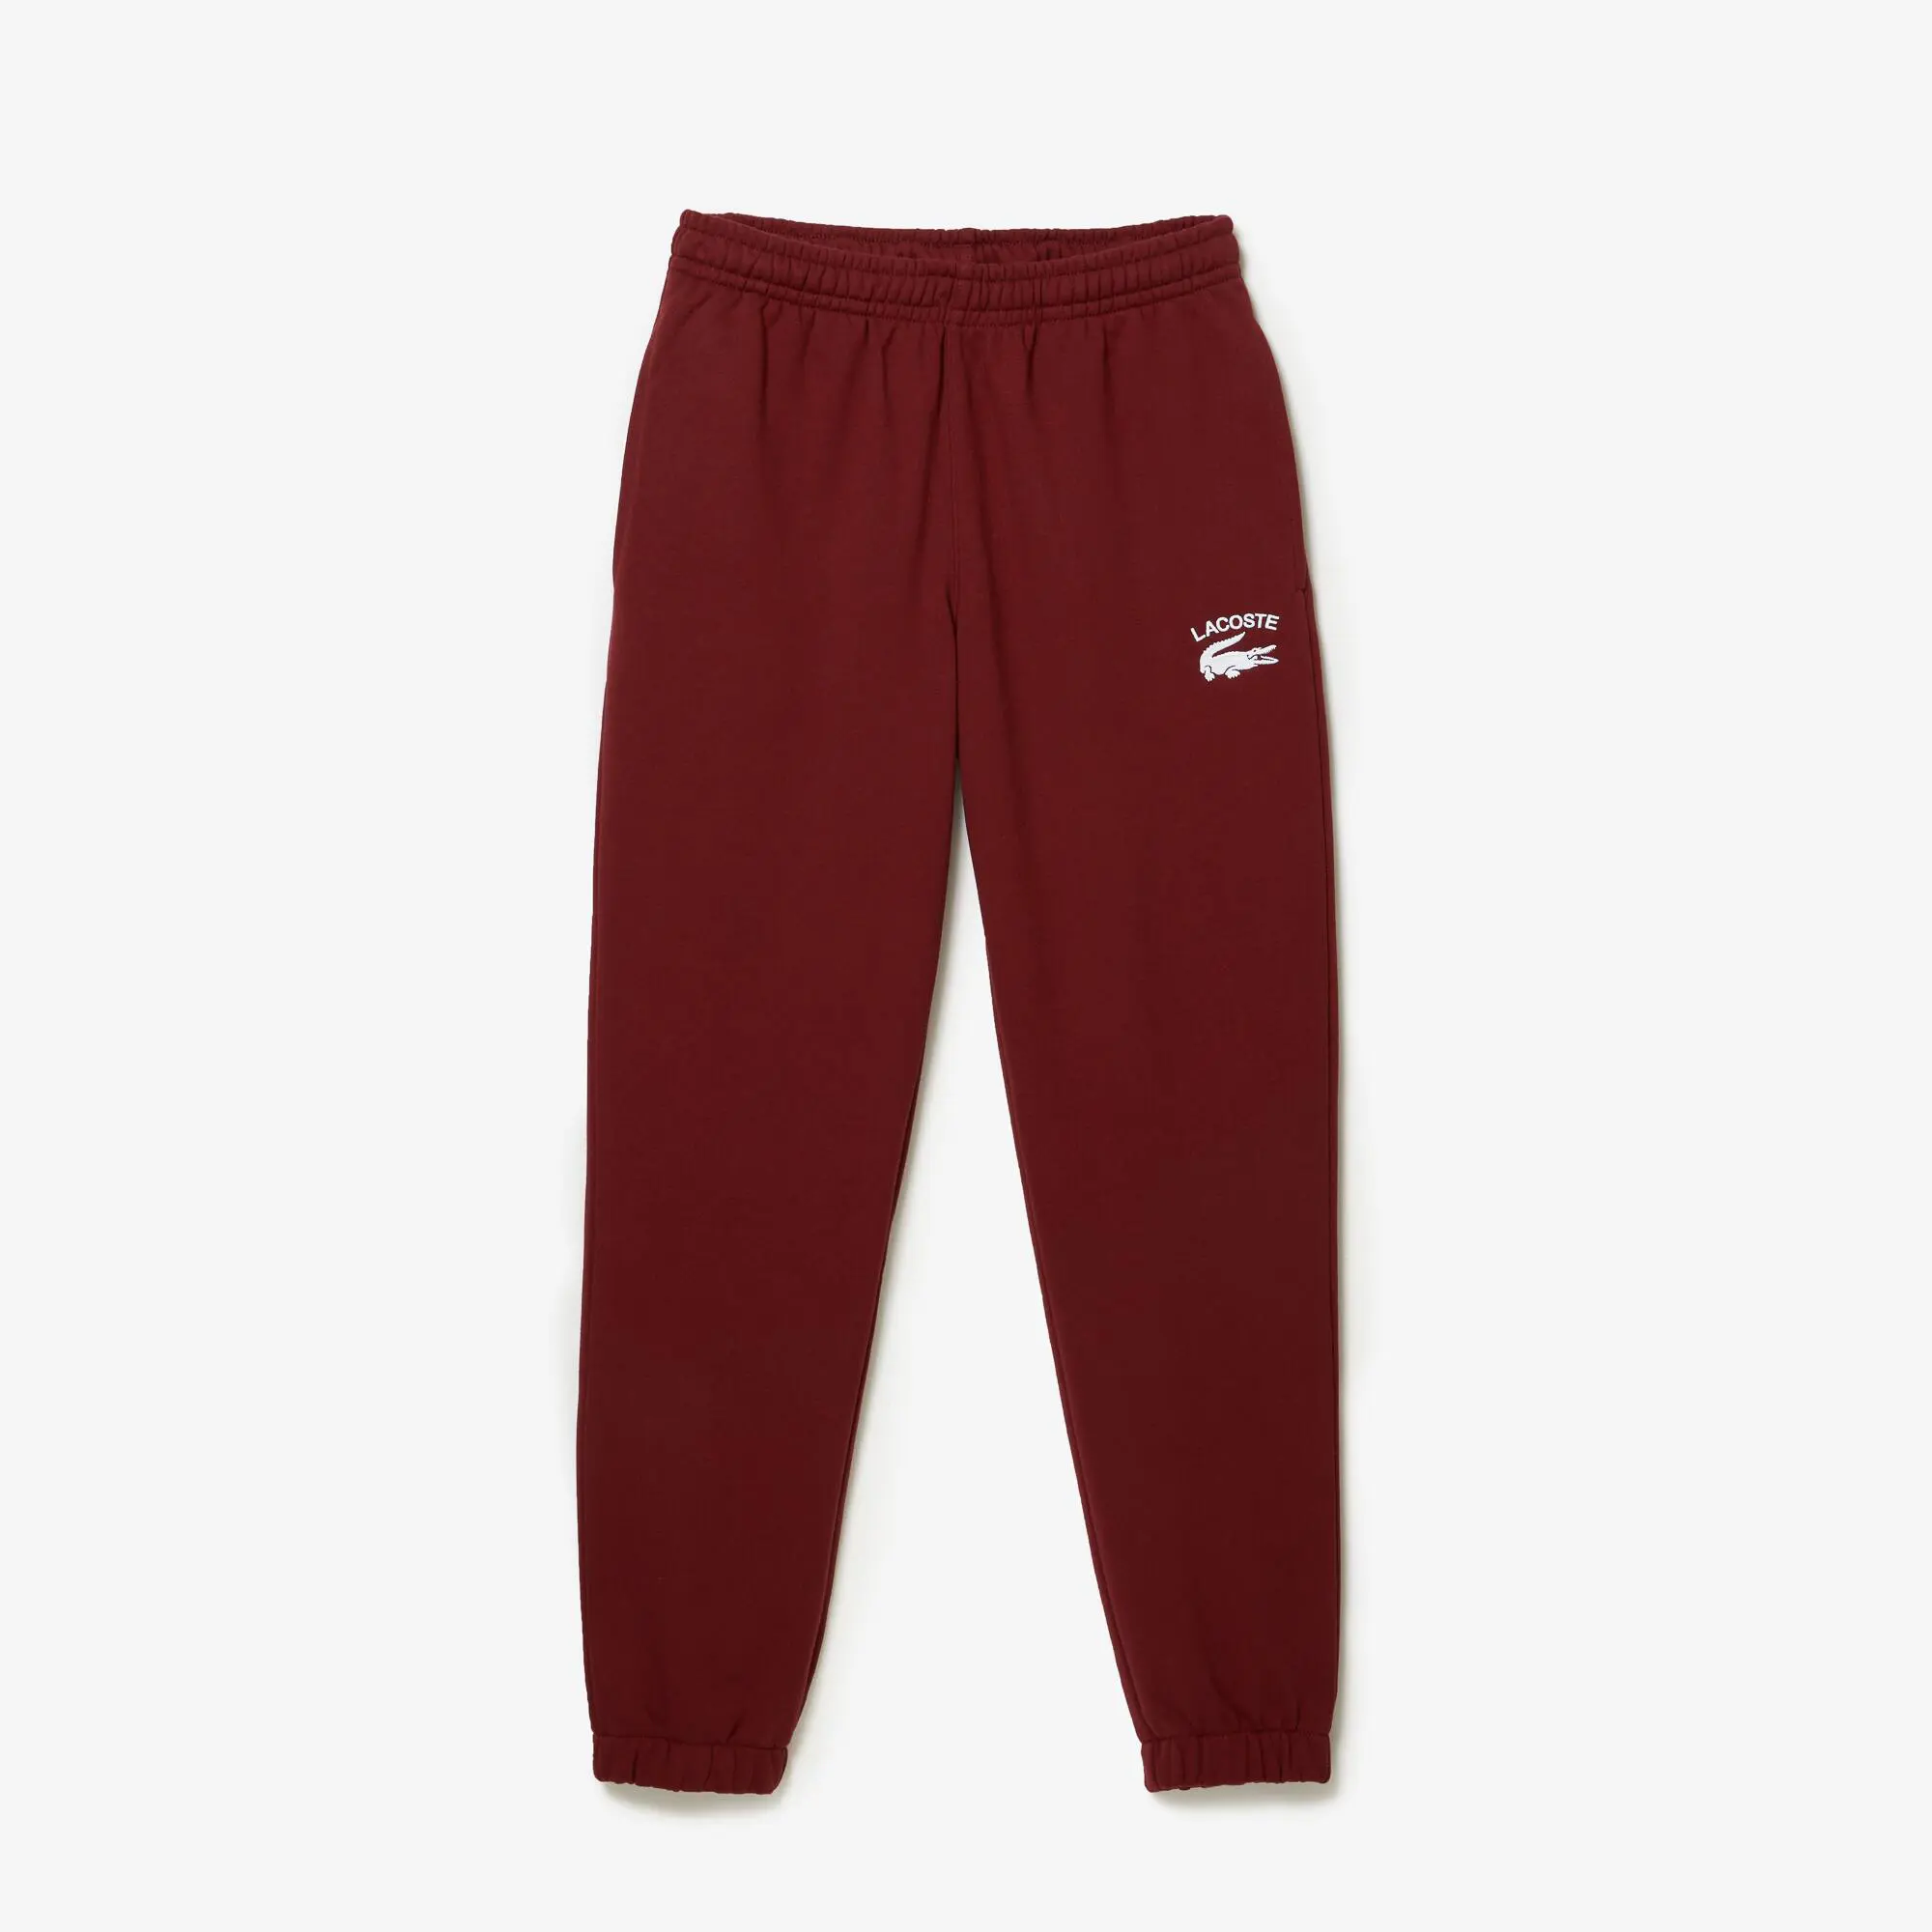 Lacoste Men's Lacoste Tapered Fit Trackpants. 2